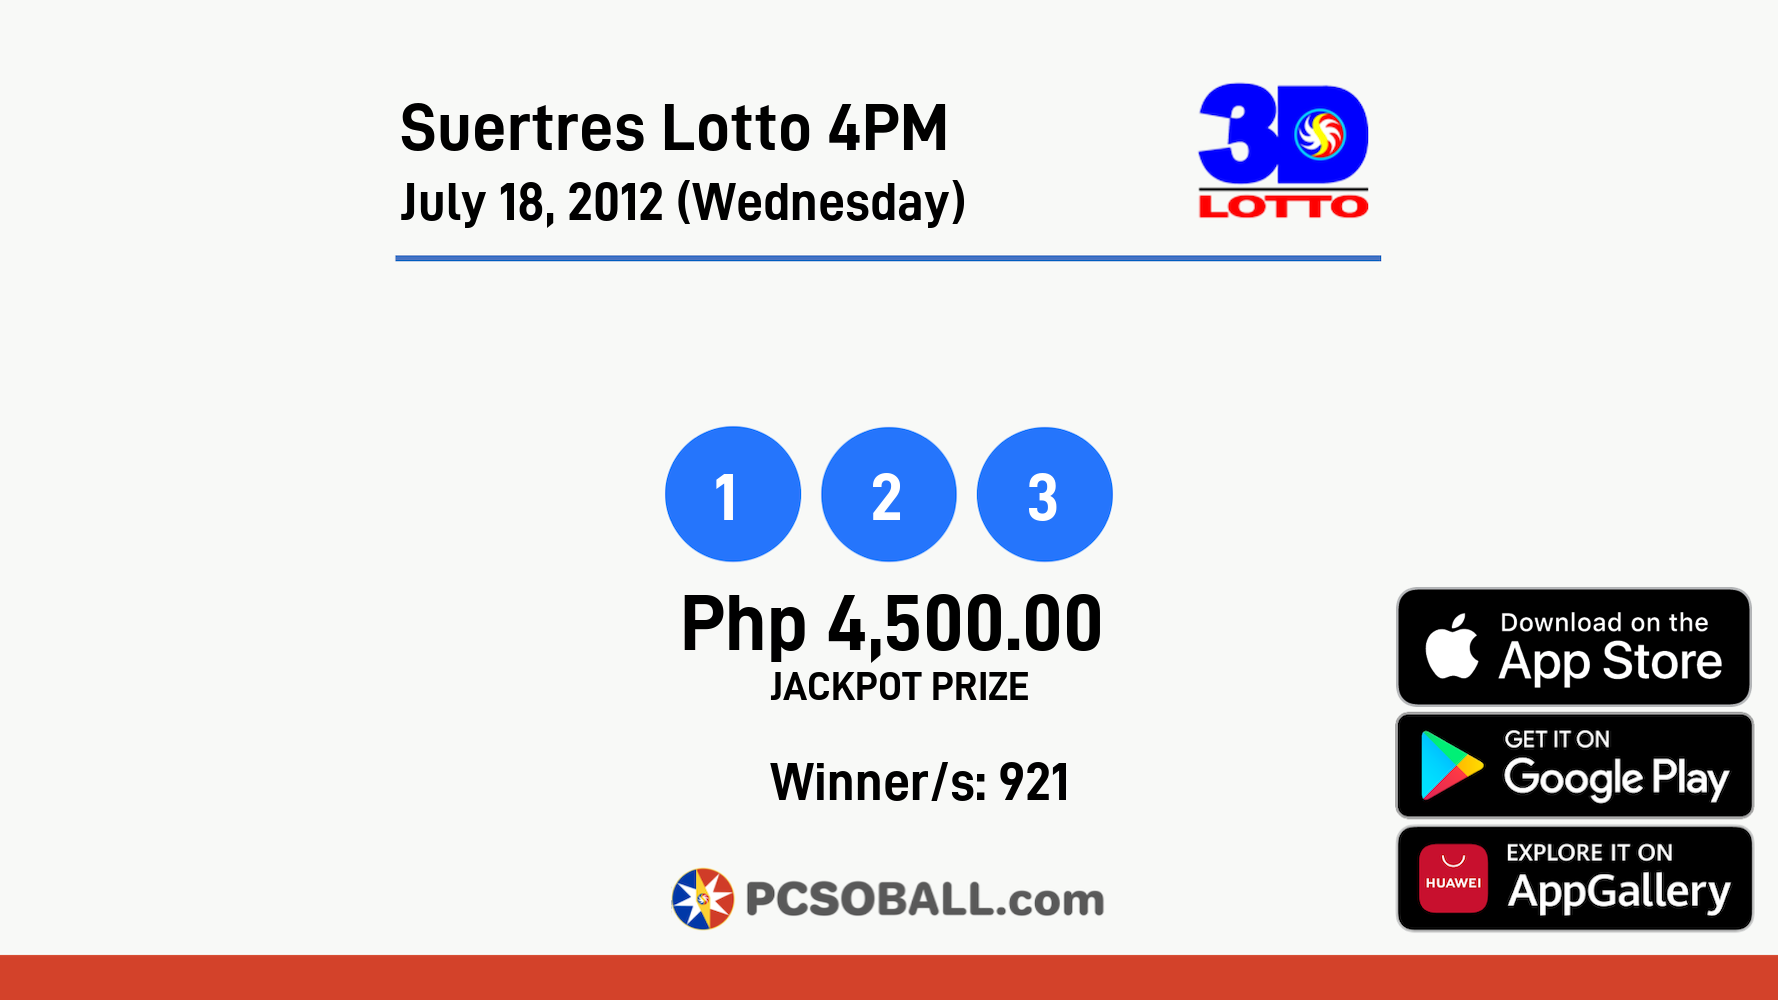 Suertres Lotto 4PM July 18, 2012 (Wednesday) Result